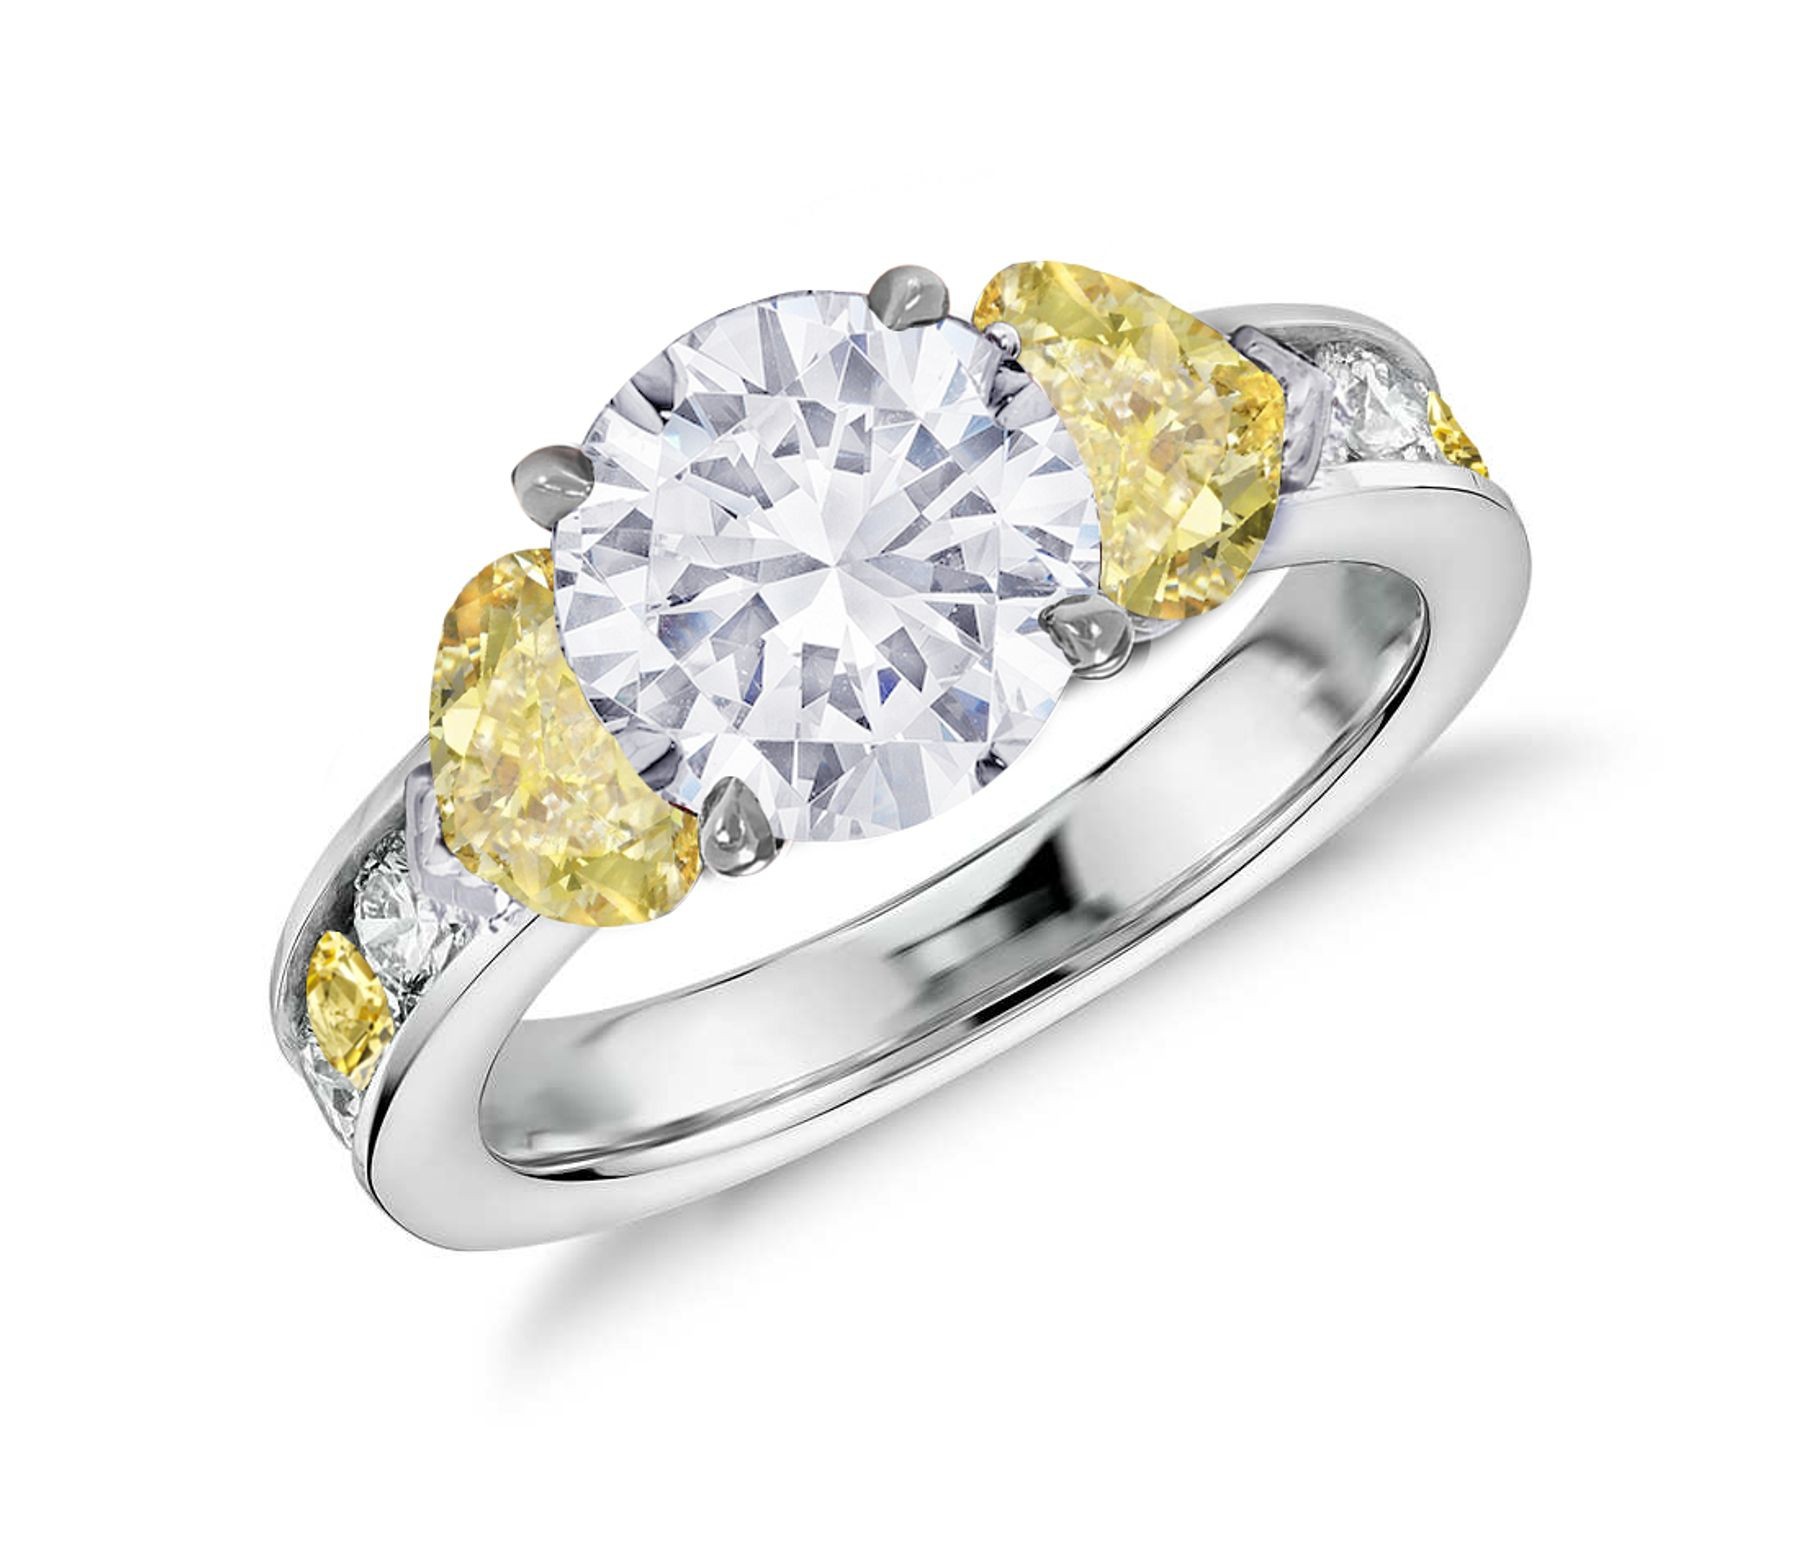 Three Stone Round Diamond & Heart Yellow Sapphires Rings With Further Diamond Accents